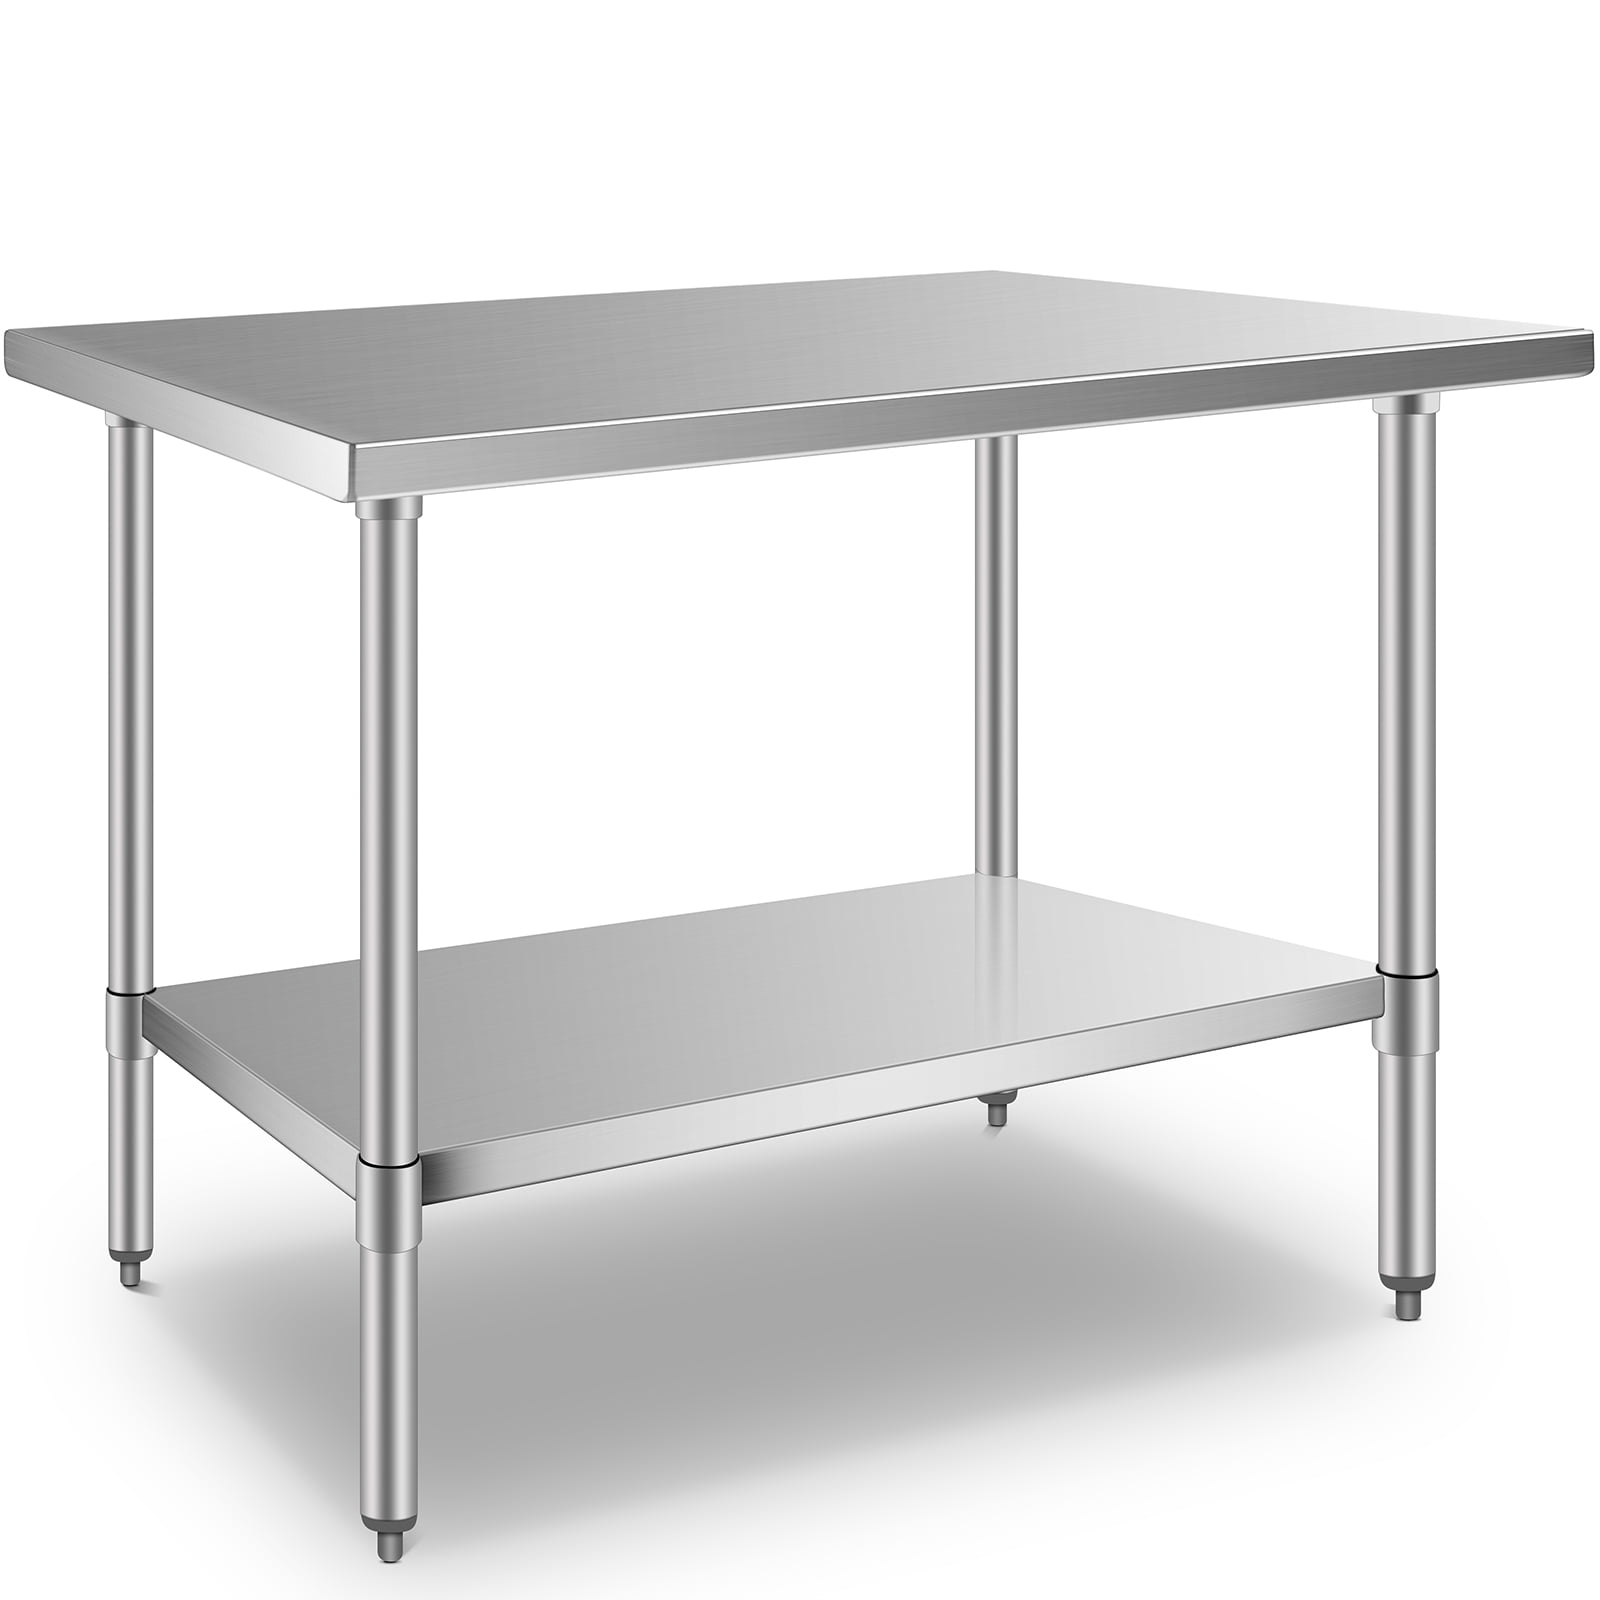 NSF Stainless Steel Equipment Grill Stand with Baffle for Restaurant 48 in x 28 in Commercial Kitchen Prep Worktable 